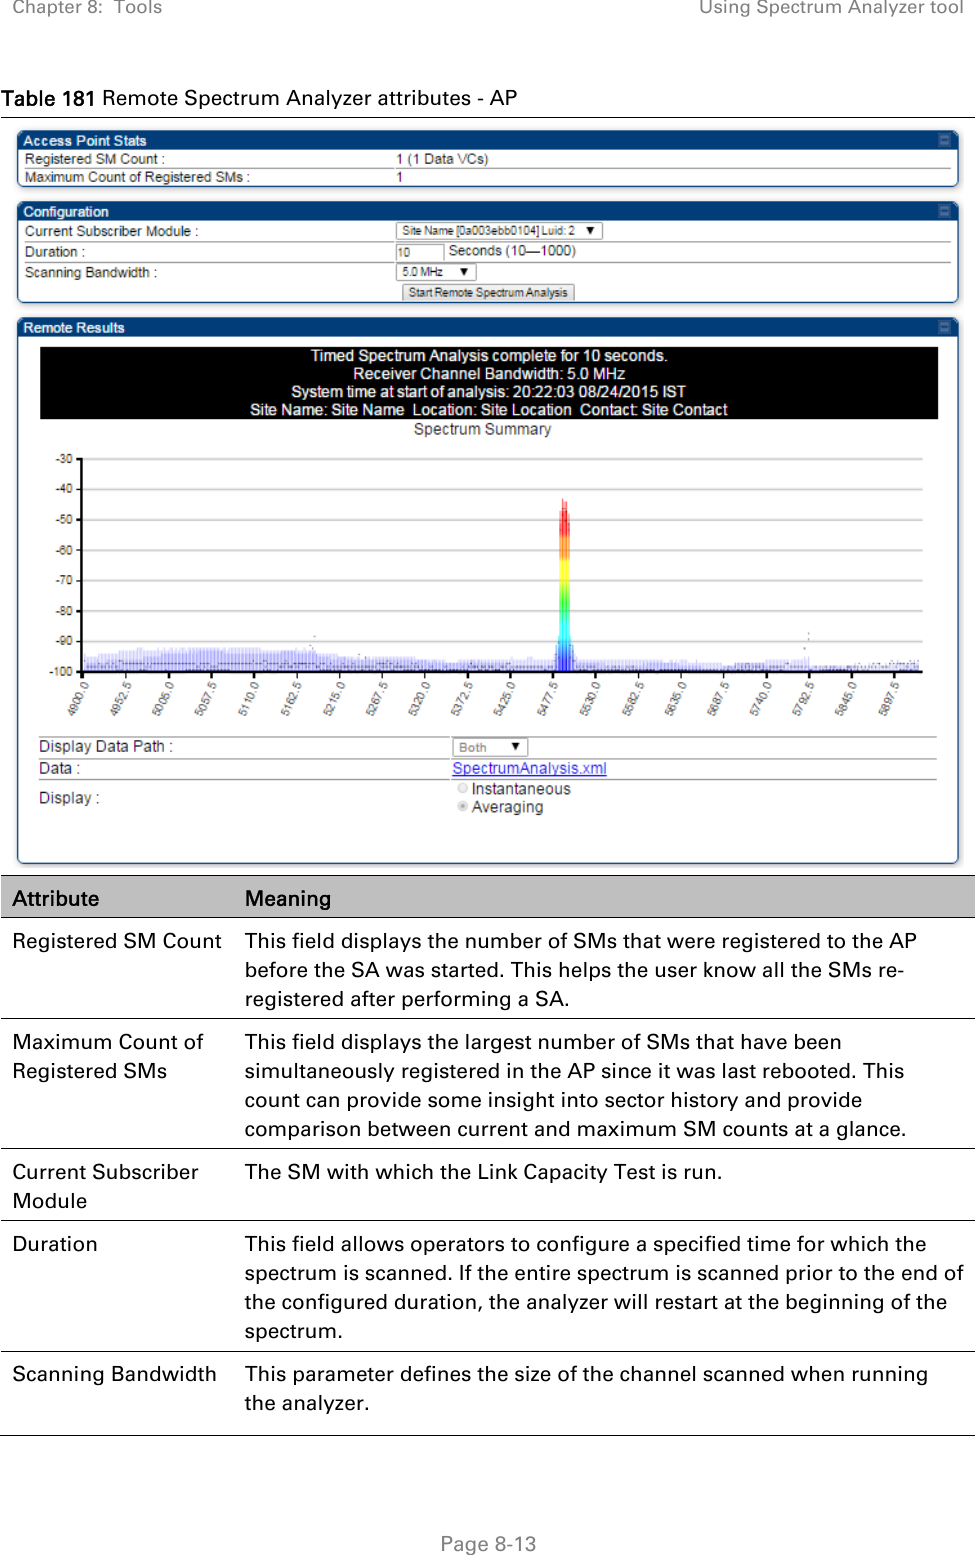 Chapter 8:  Tools  Using Spectrum Analyzer tool   Page 8-13 Table 181 Remote Spectrum Analyzer attributes - AP  Attribute  Meaning Registered SM Count  This field displays the number of SMs that were registered to the AP before the SA was started. This helps the user know all the SMs re-registered after performing a SA. Maximum Count of Registered SMs This field displays the largest number of SMs that have been simultaneously registered in the AP since it was last rebooted. This count can provide some insight into sector history and provide comparison between current and maximum SM counts at a glance. Current Subscriber Module The SM with which the Link Capacity Test is run. Duration  This field allows operators to configure a specified time for which the spectrum is scanned. If the entire spectrum is scanned prior to the end of the configured duration, the analyzer will restart at the beginning of the spectrum. Scanning Bandwidth  This parameter defines the size of the channel scanned when running the analyzer. 